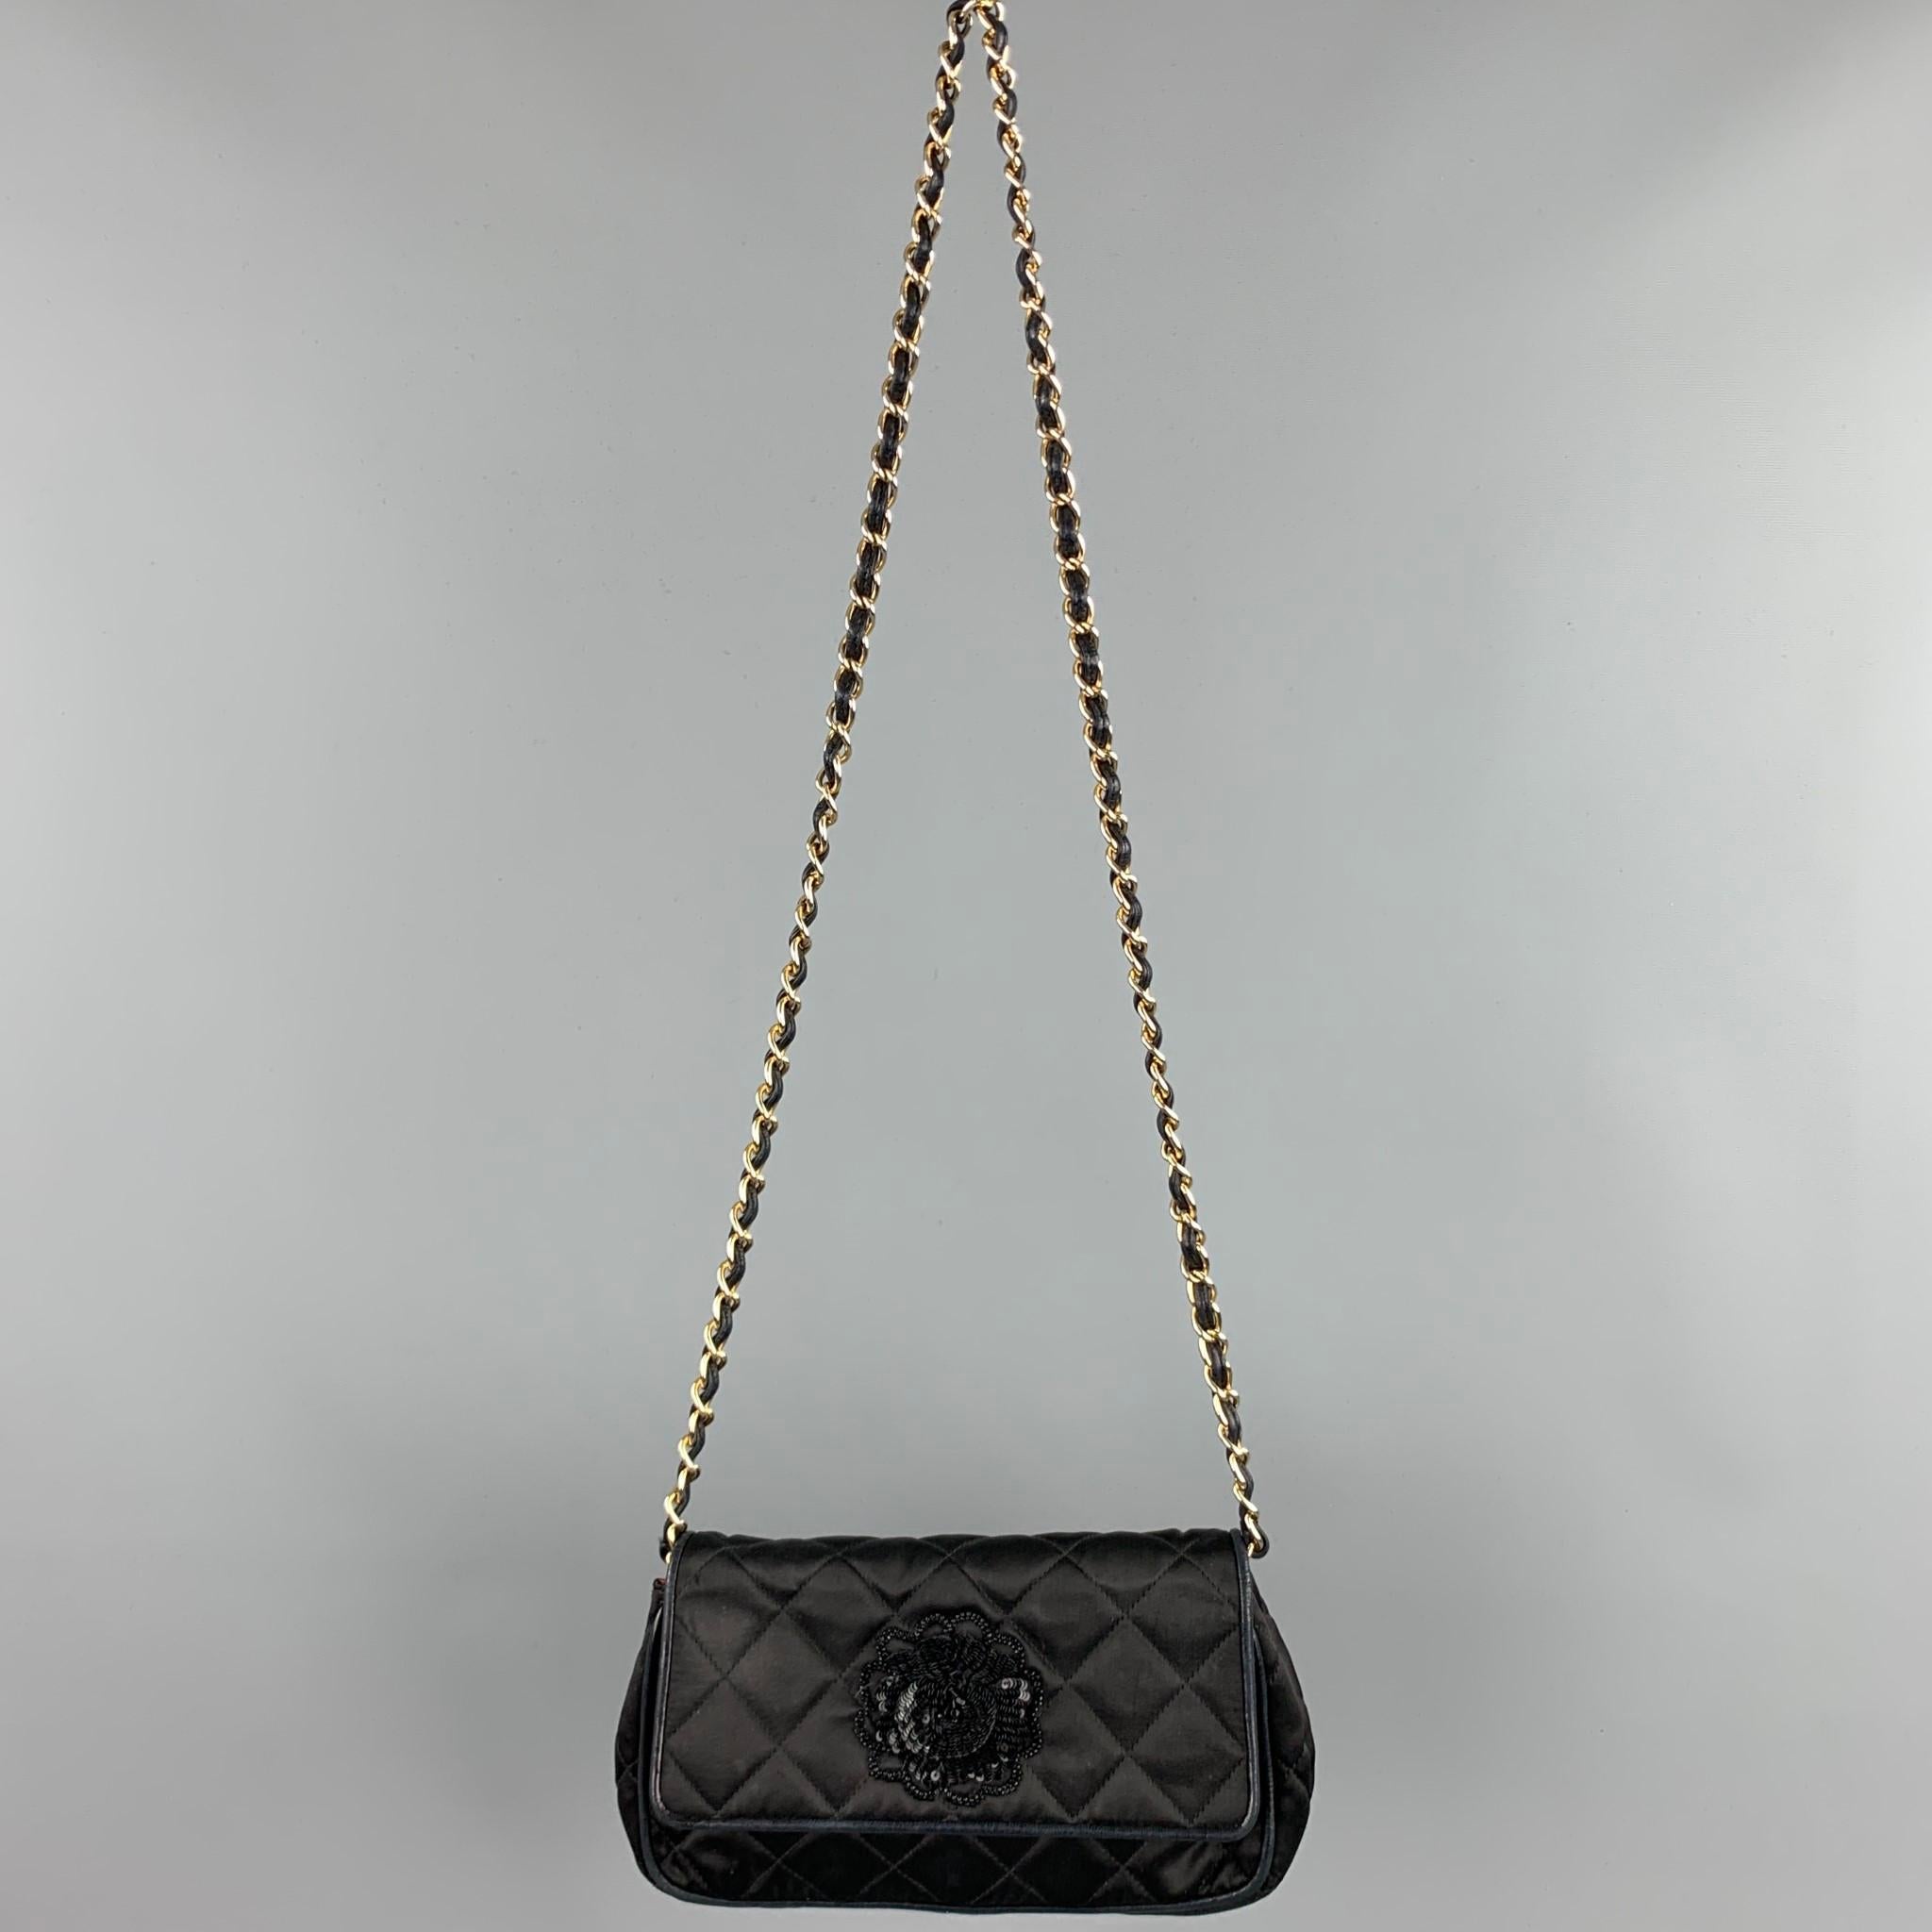 Vintage CHANEL handbag comes in a black quilted nylon with a leather trim featuring a front sequined flower design, chain cross body strap, red interior, inner zipper pocket, and a snap button closure. Made in Italy.

Very Good Pre-Owned